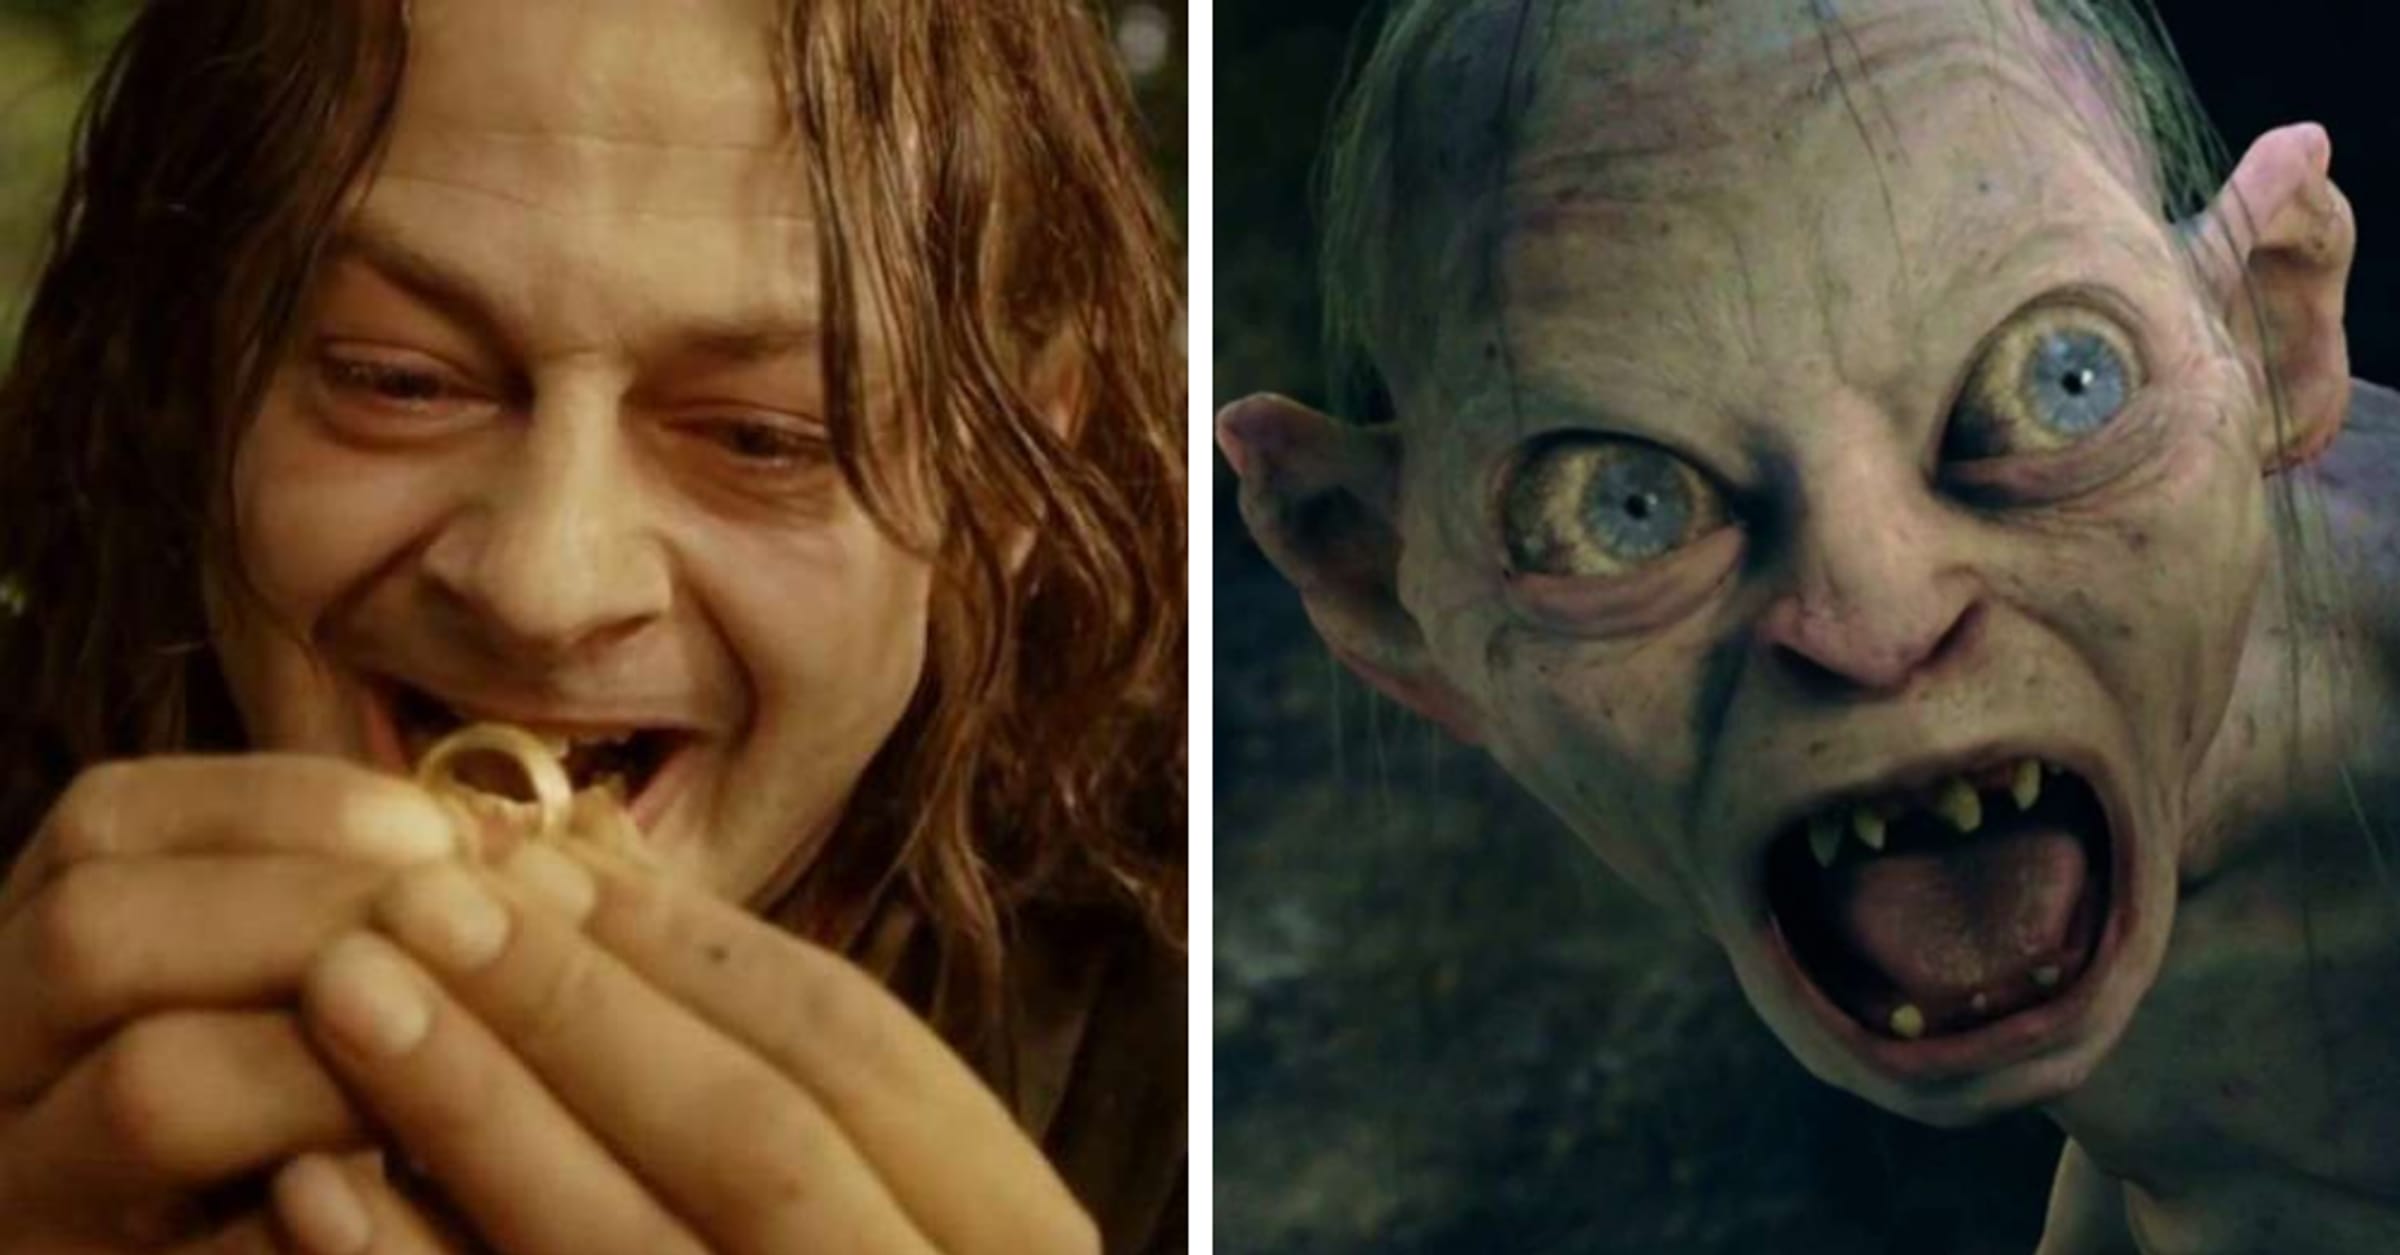 How Long It Takes To Beat The Lord of the RIngs: Gollum